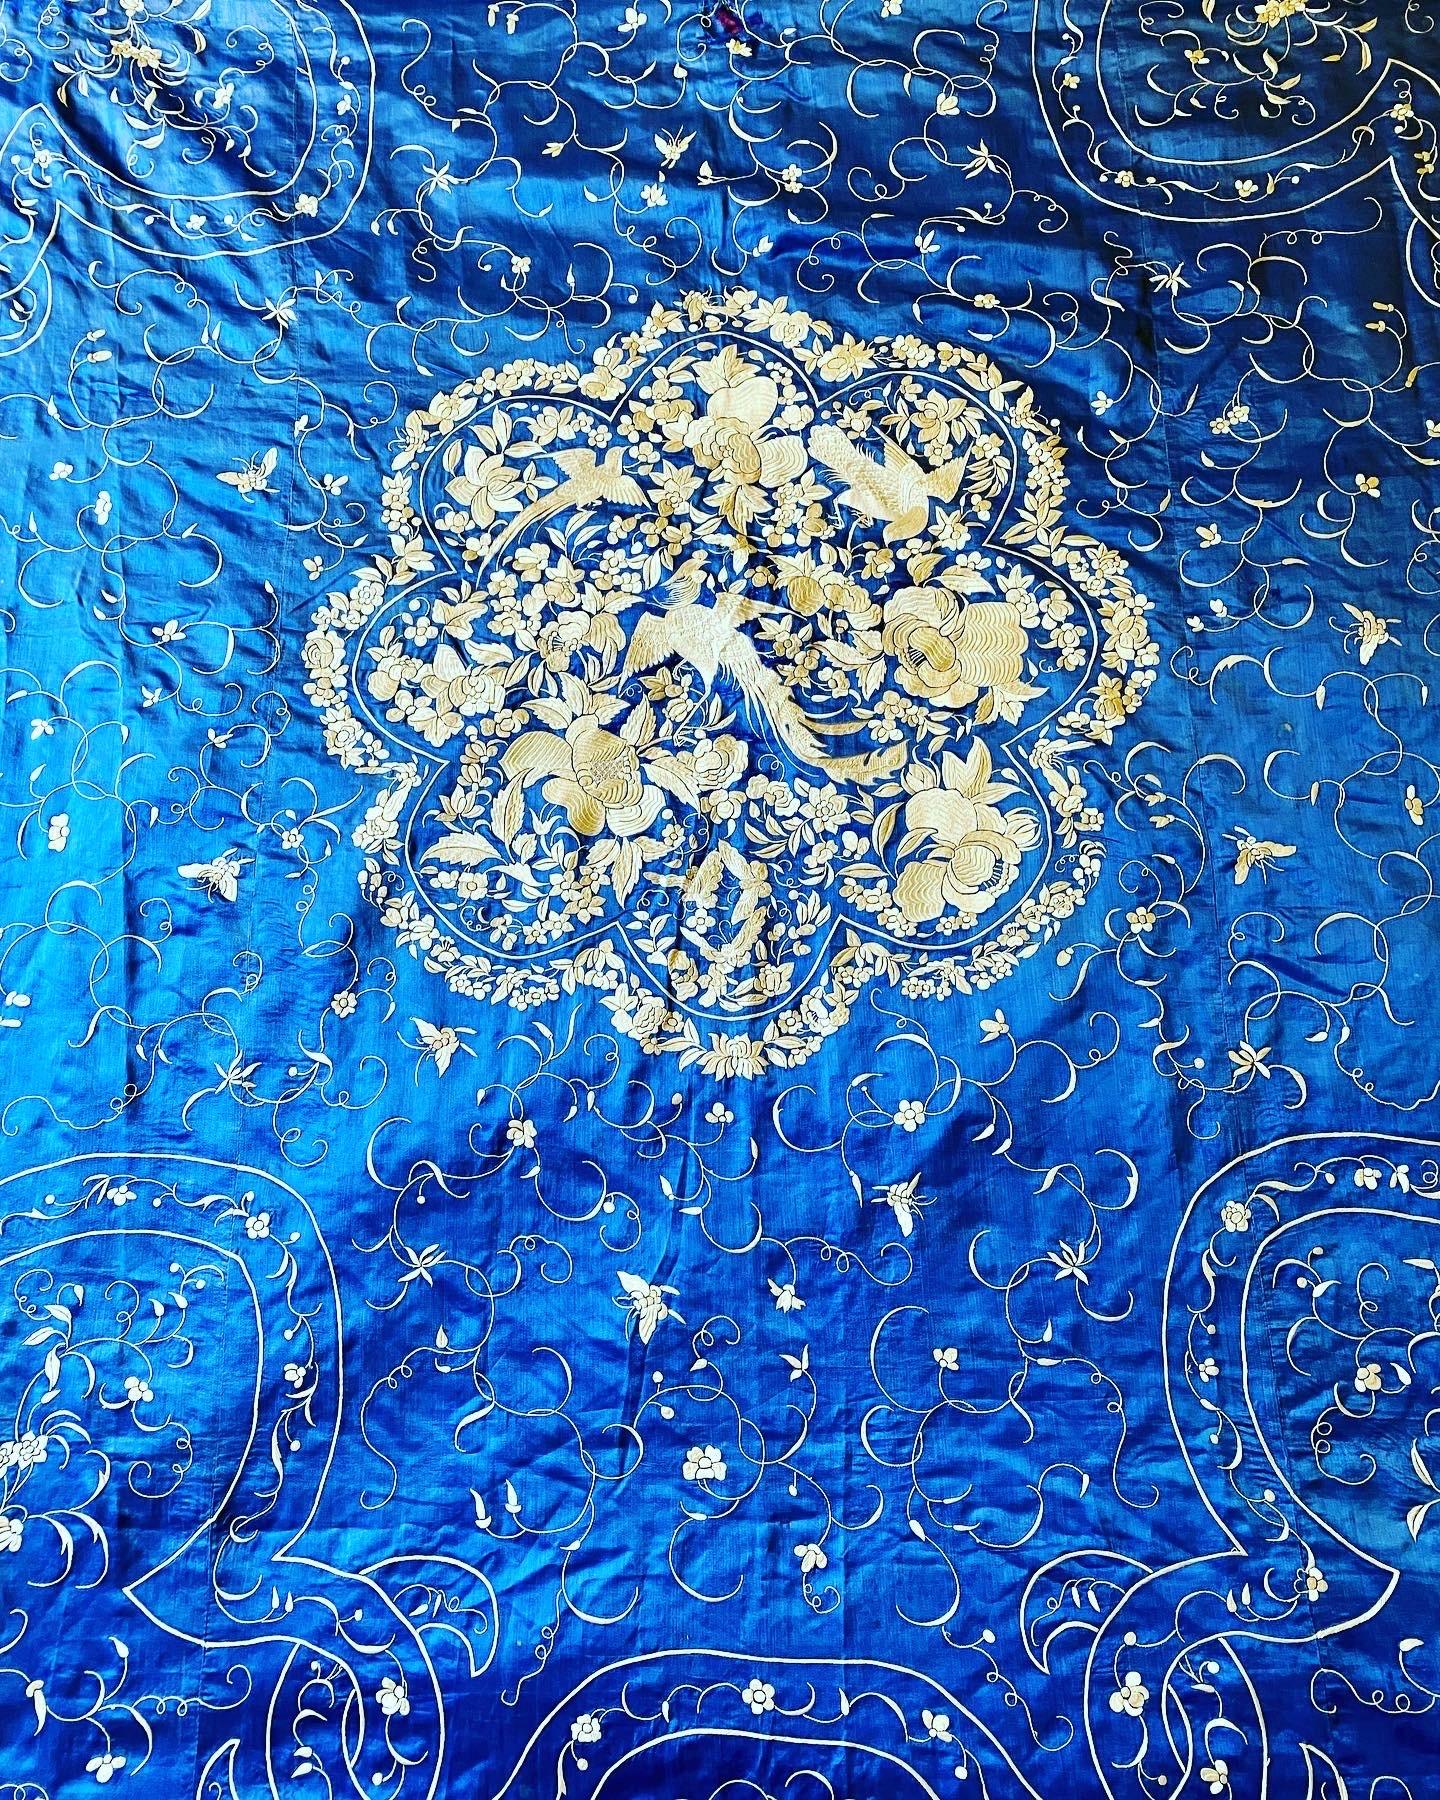 Circa 1860-1880
China for export to Europe

Large Canton hanging or square bedspread in electric-blue silk satin embroidered with white silk cordonet, from China for the Compagnie des Indes export. Chinese decoration with a large central rose window